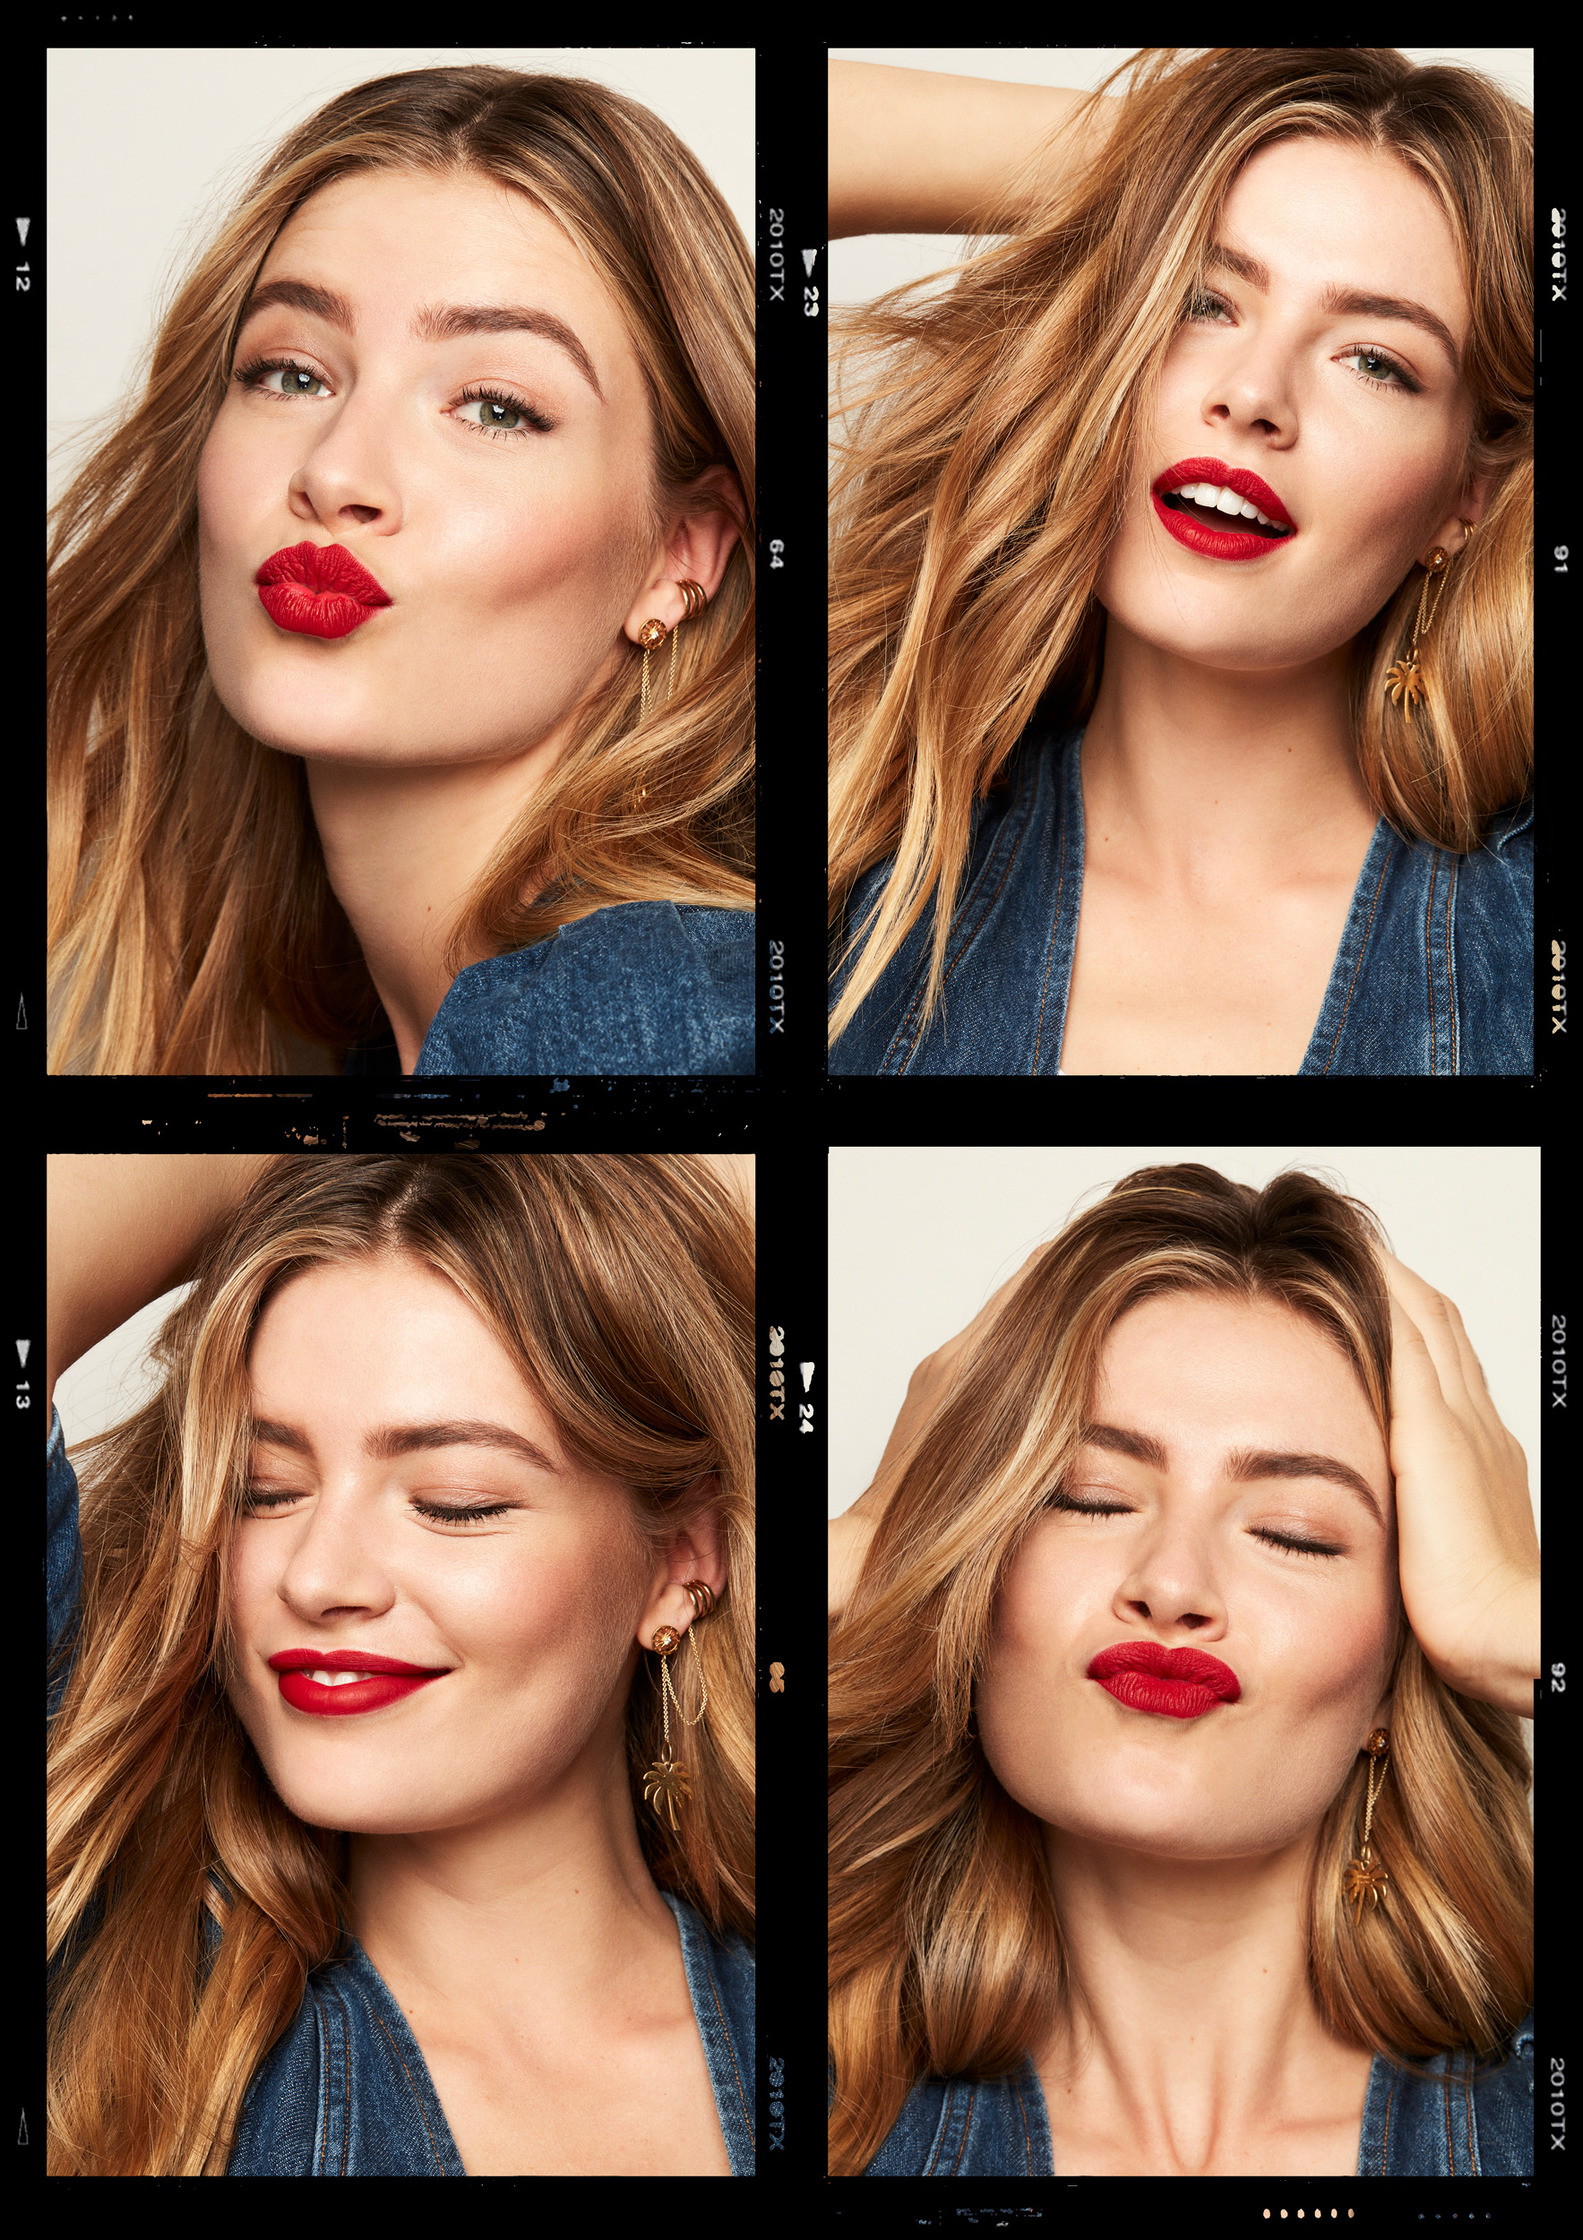 four different pictures of a woman with red lips